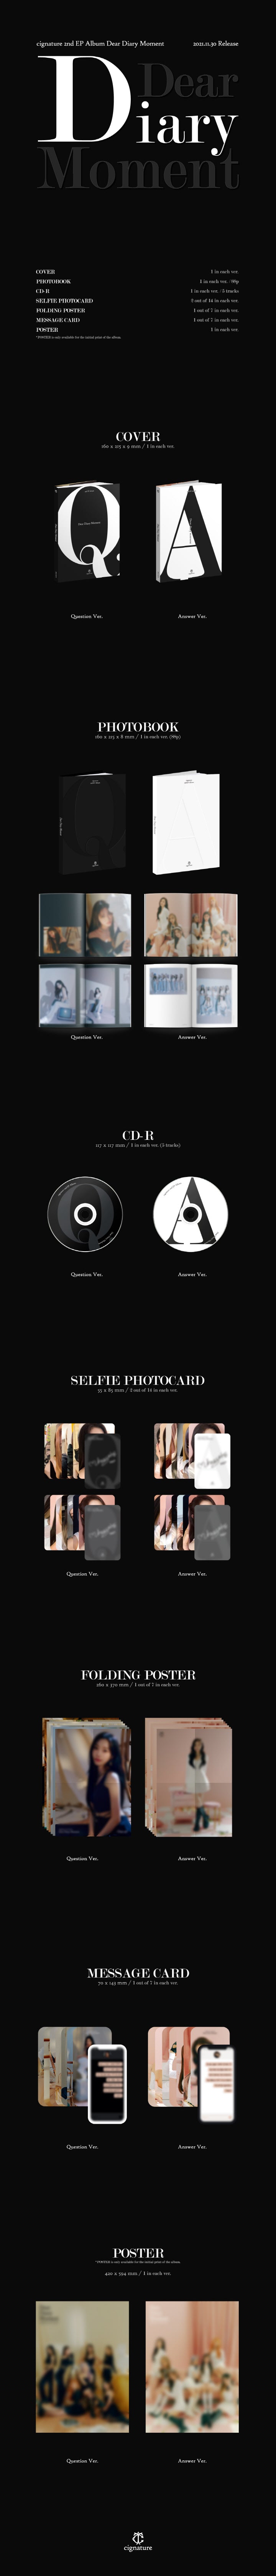 1 CD
1 Photo Book (88 pages)
2 Selfie Photo Cards (random out of 14 types per version)
1 Folding Poster (random out of 7 t...